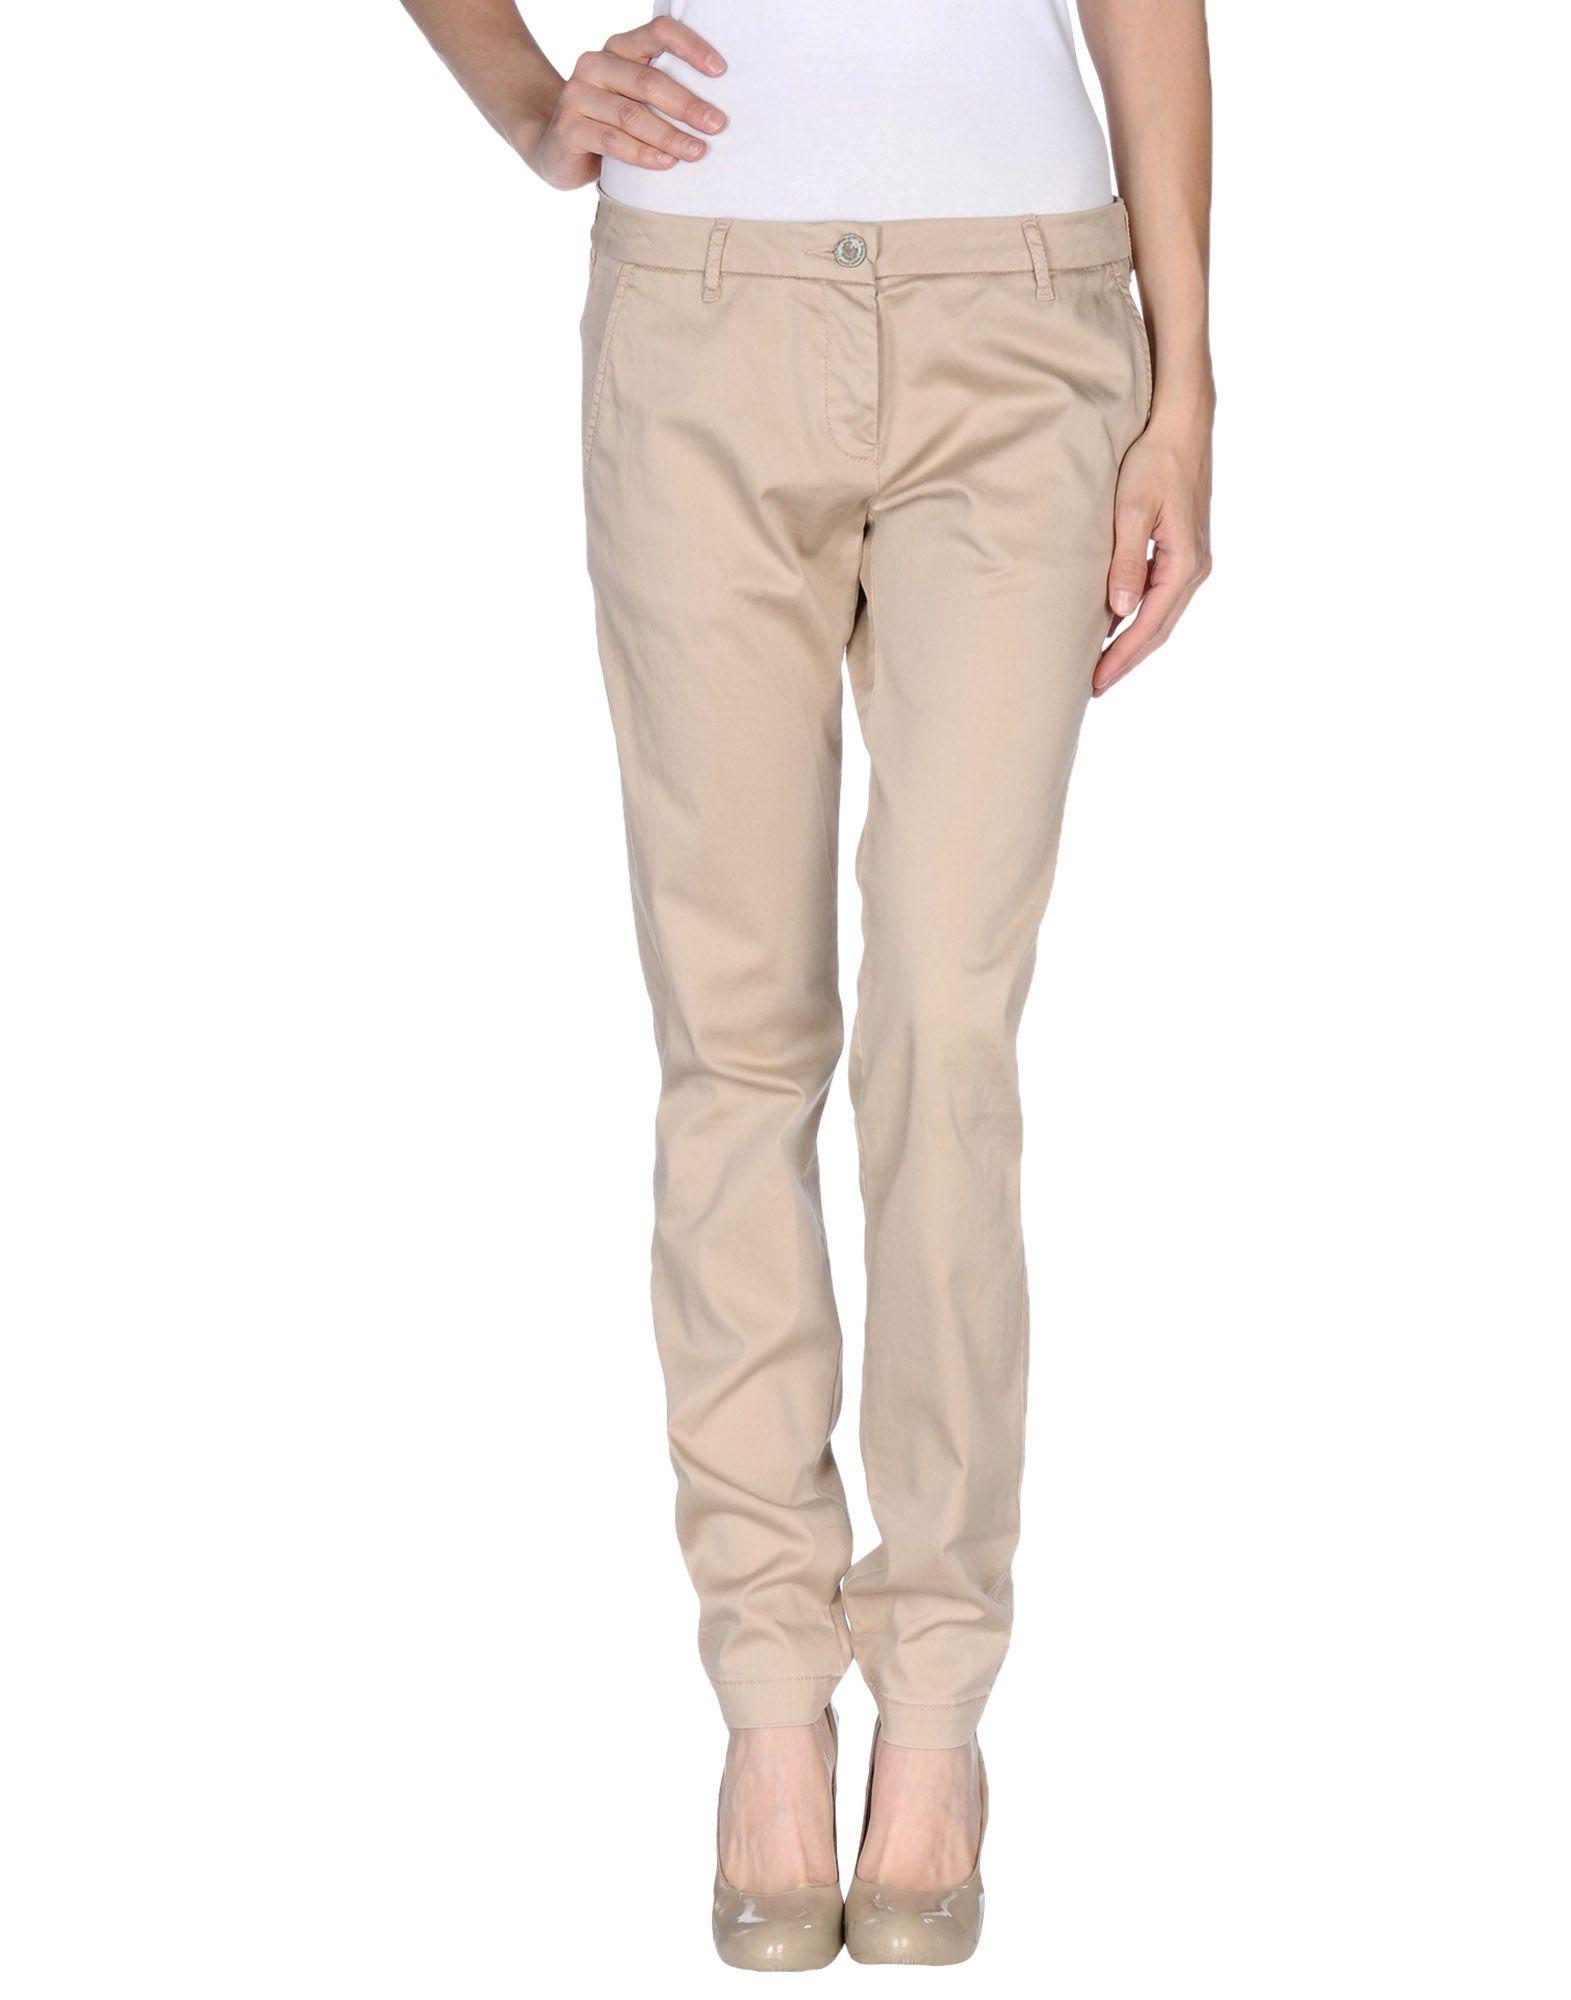 Maison Scotch Cotton Casual Pants in Sand (Natural) - Lyst